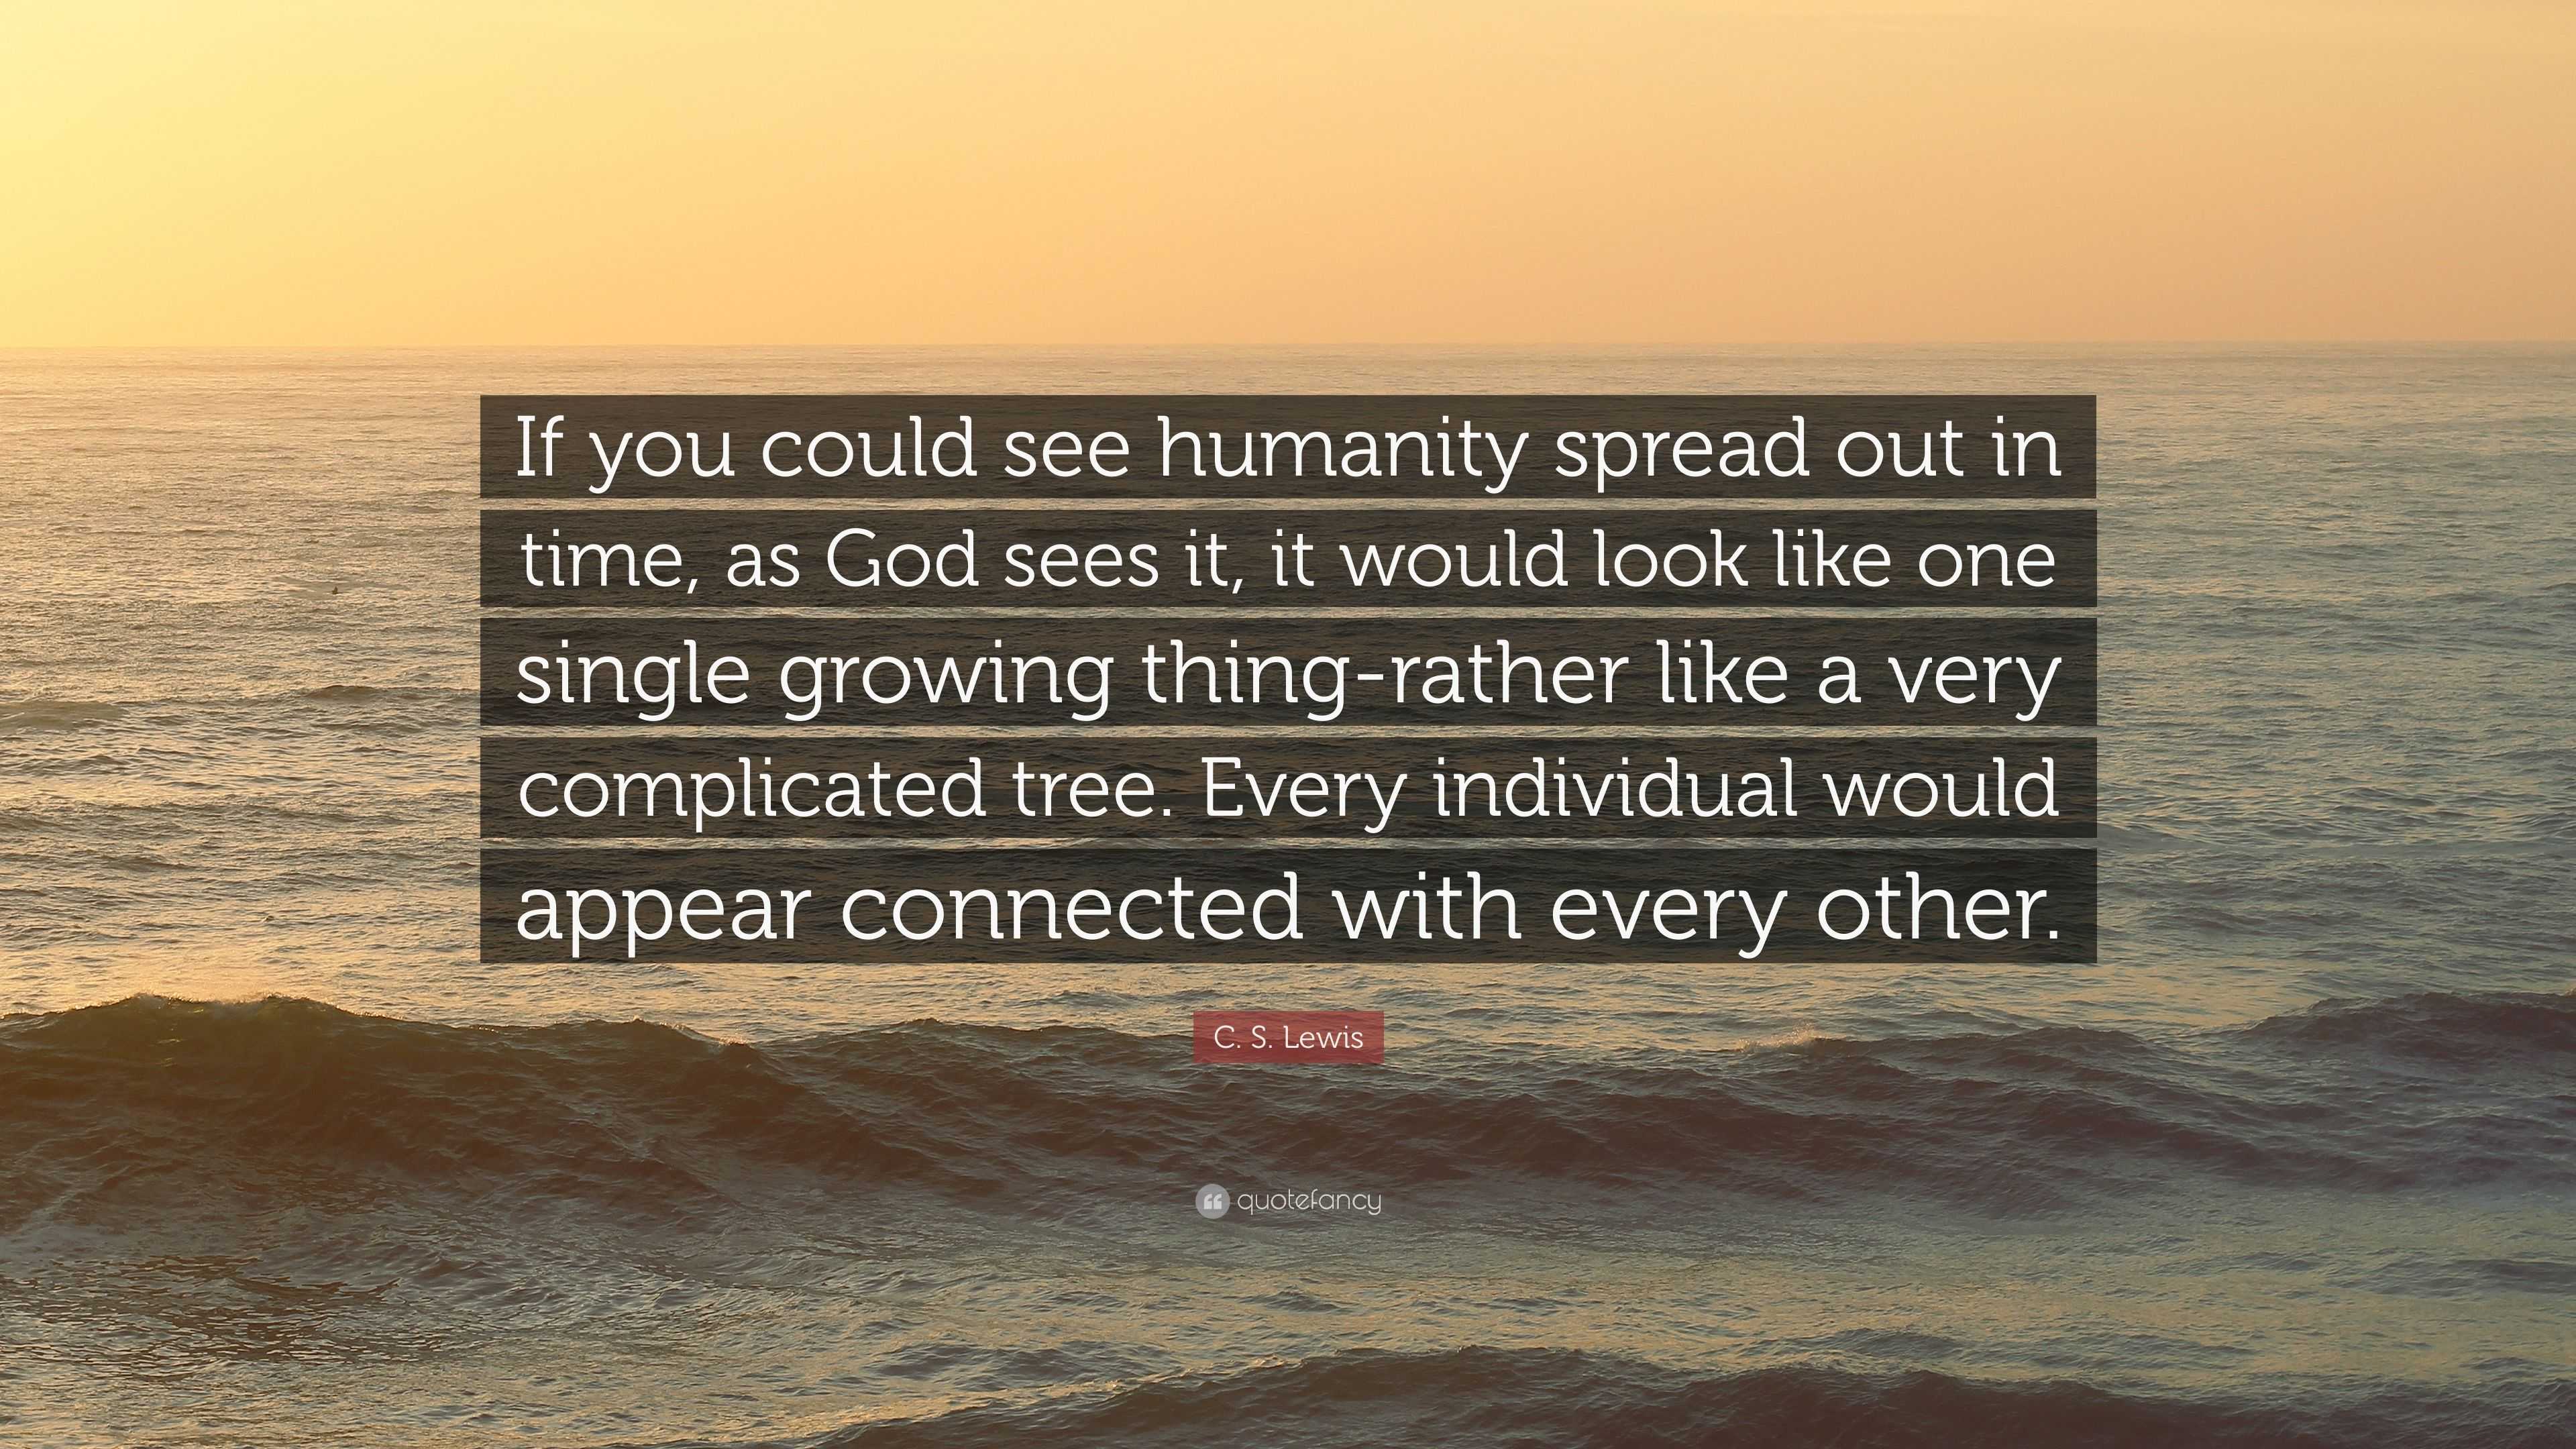 C. S. Lewis Quote: “If you could see humanity spread out in time ...